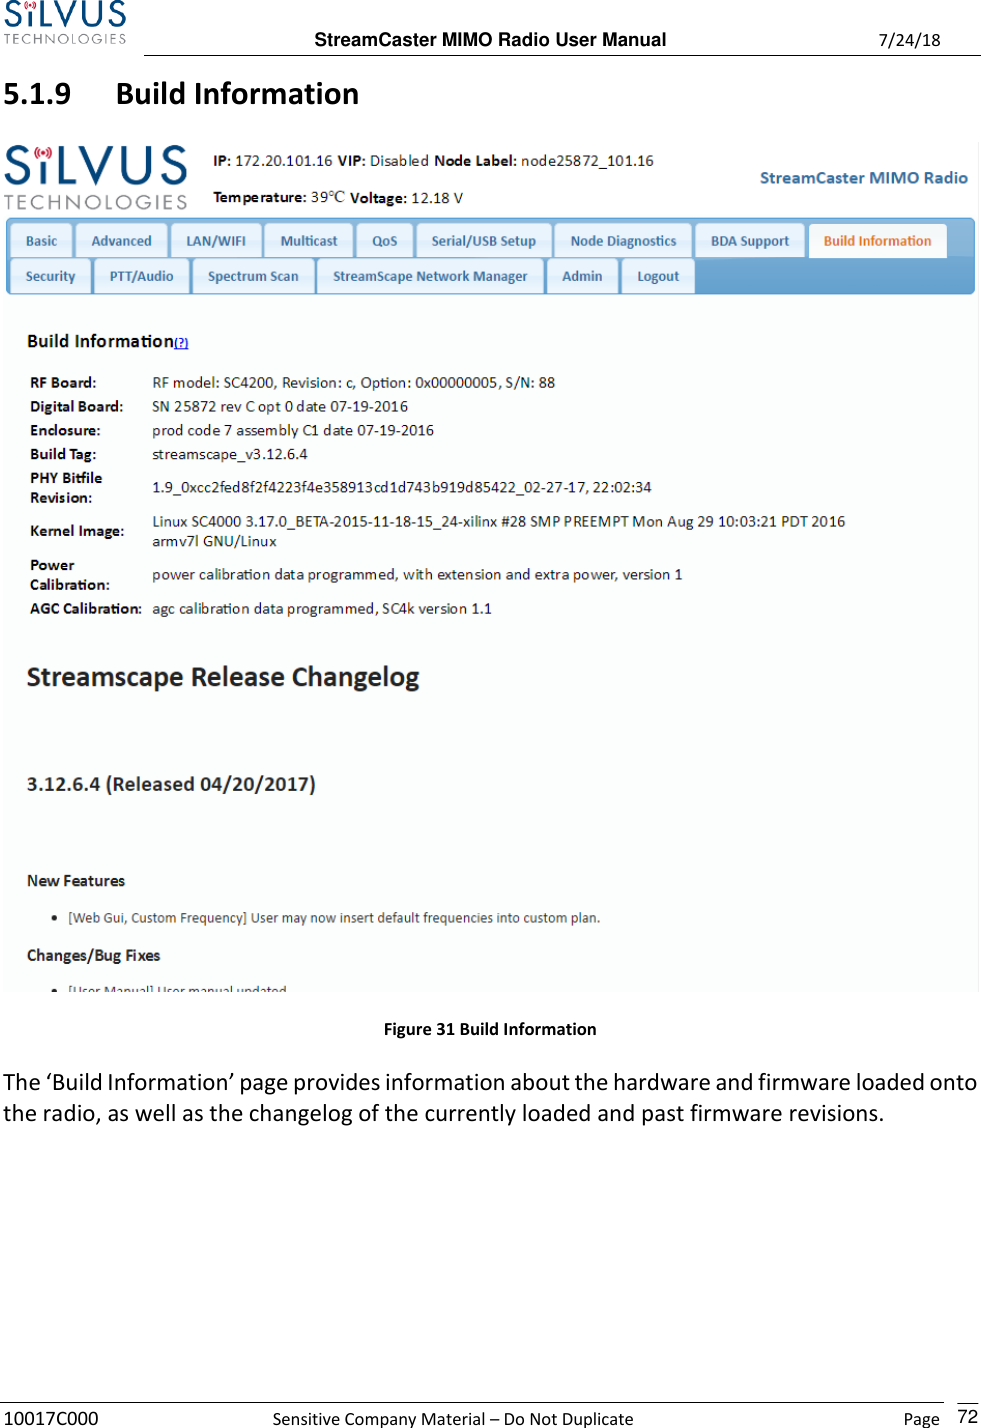  StreamCaster MIMO Radio User Manual  7/24/18 10017C000  Sensitive Company Material – Do Not Duplicate    Page    72 5.1.9 Build Information  Figure 31 Build Information The ‘Build Information’ page provides information about the hardware and firmware loaded onto the radio, as well as the changelog of the currently loaded and past firmware revisions.    